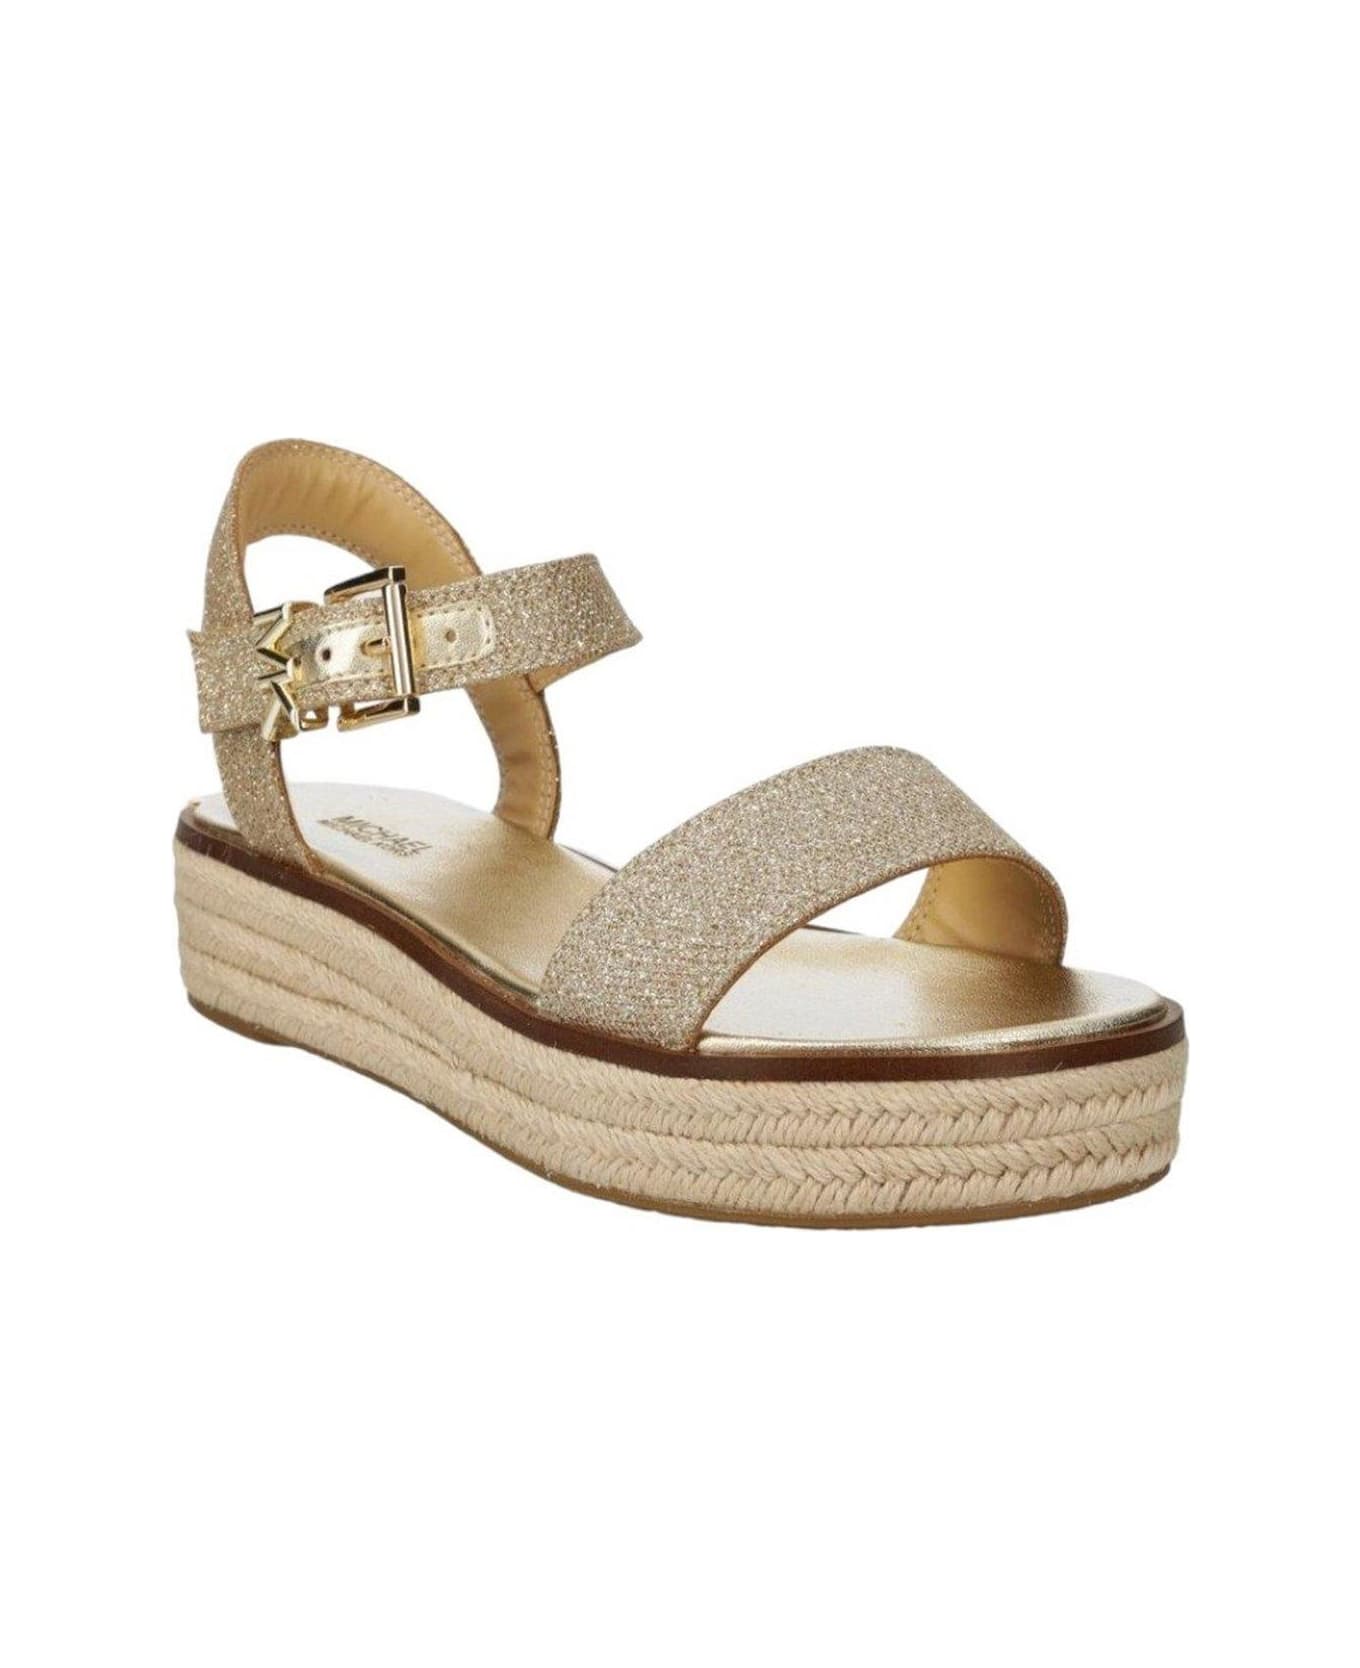 Michael Kors Richie Glitter Buckle-fastened Sandals - Champagne